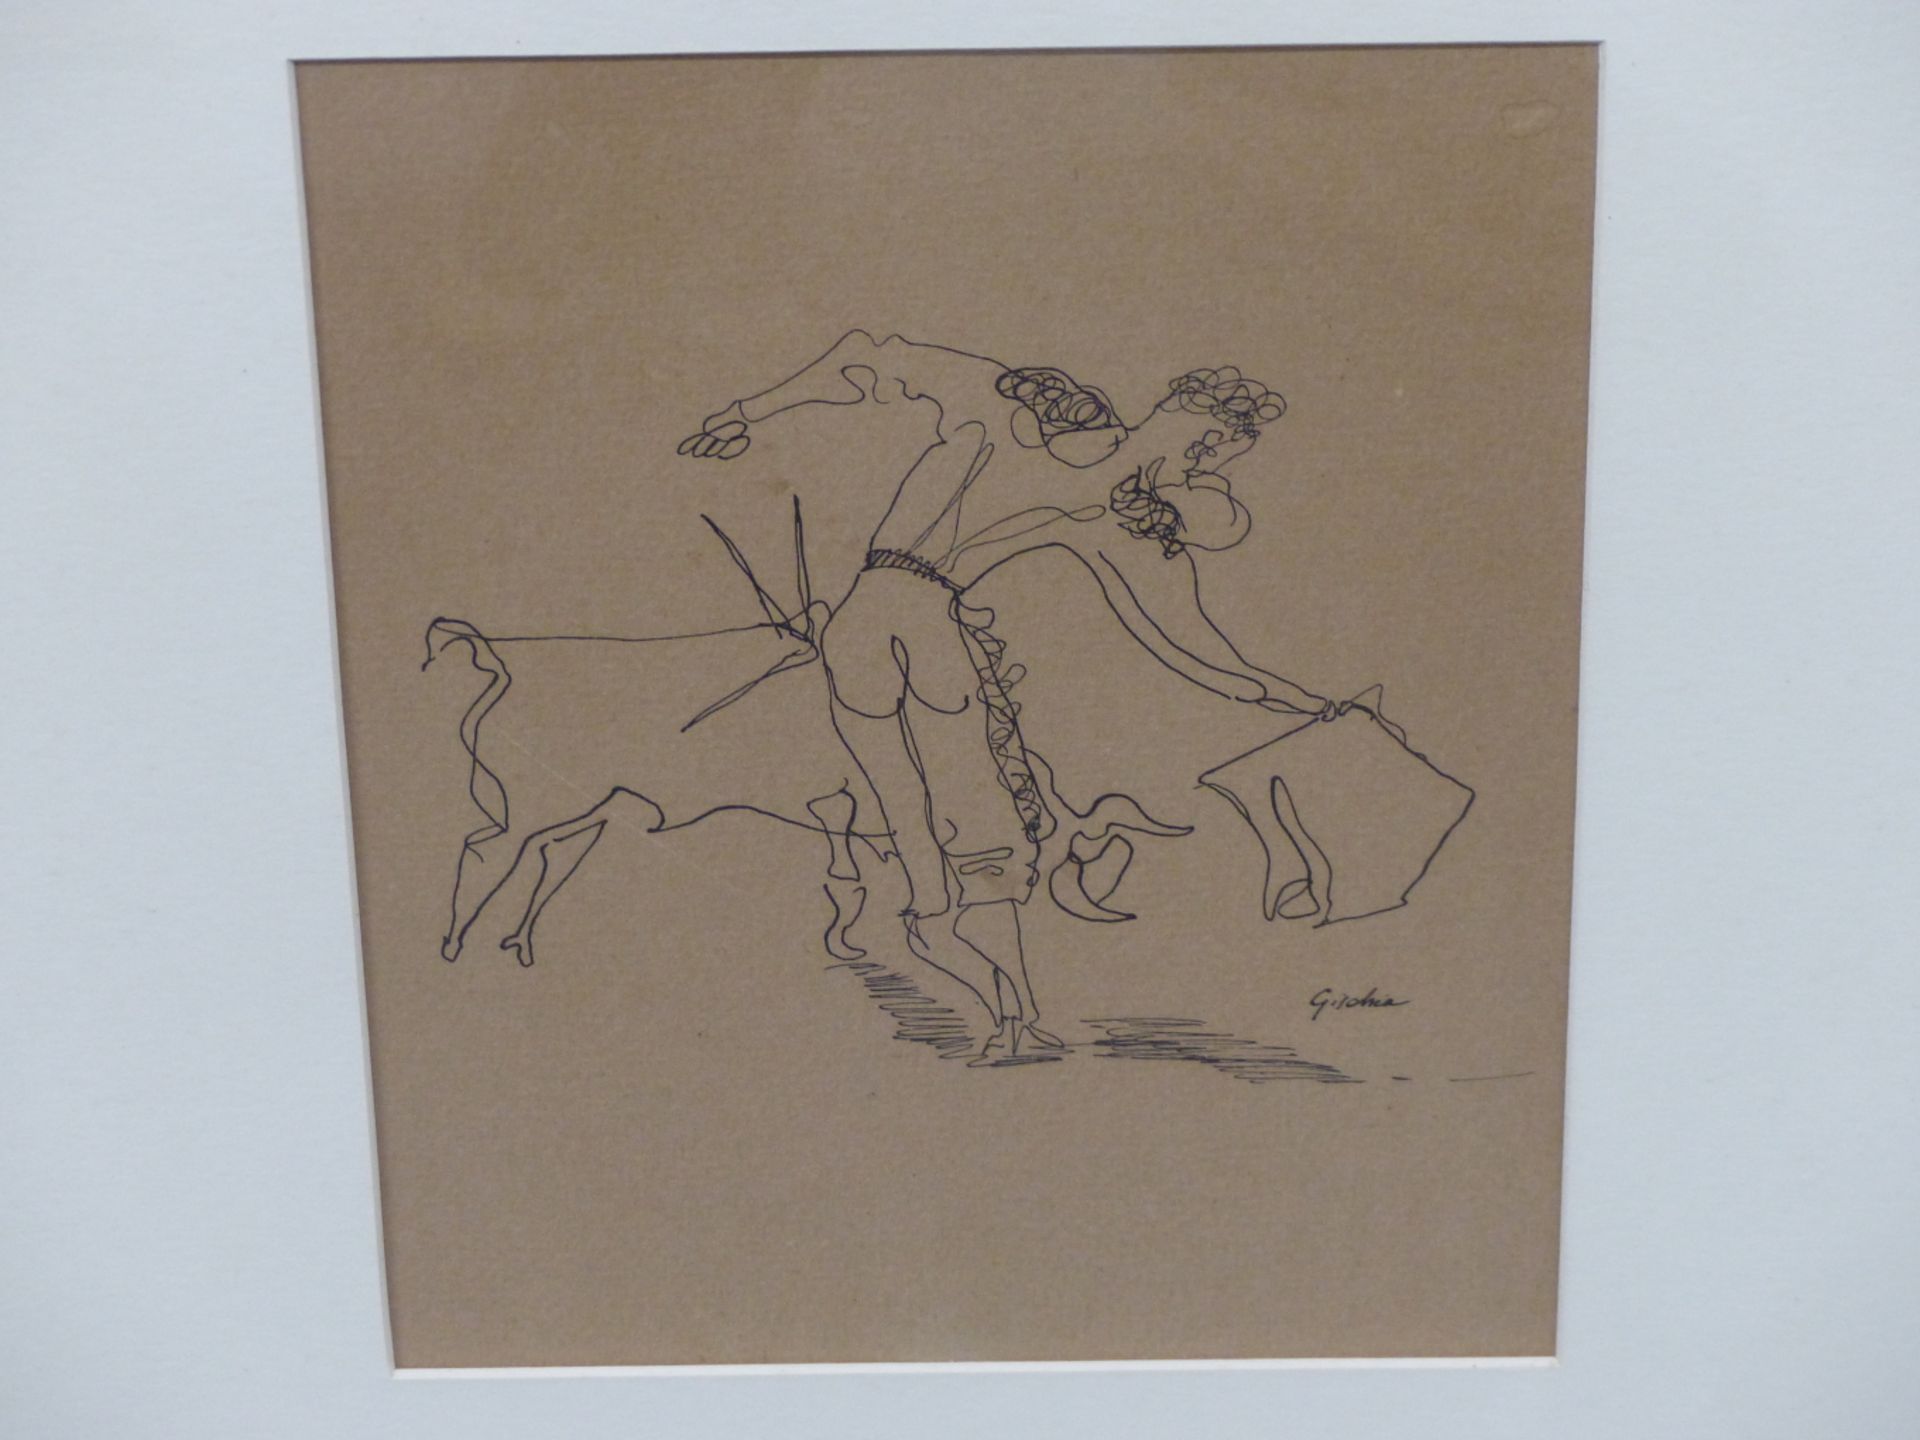 LEON GISCHIA, FRENCH 1903-1991, ABSTRACT PORTRAYAL OF THE BULL FIGHTER AND BULL. PEN AND INK